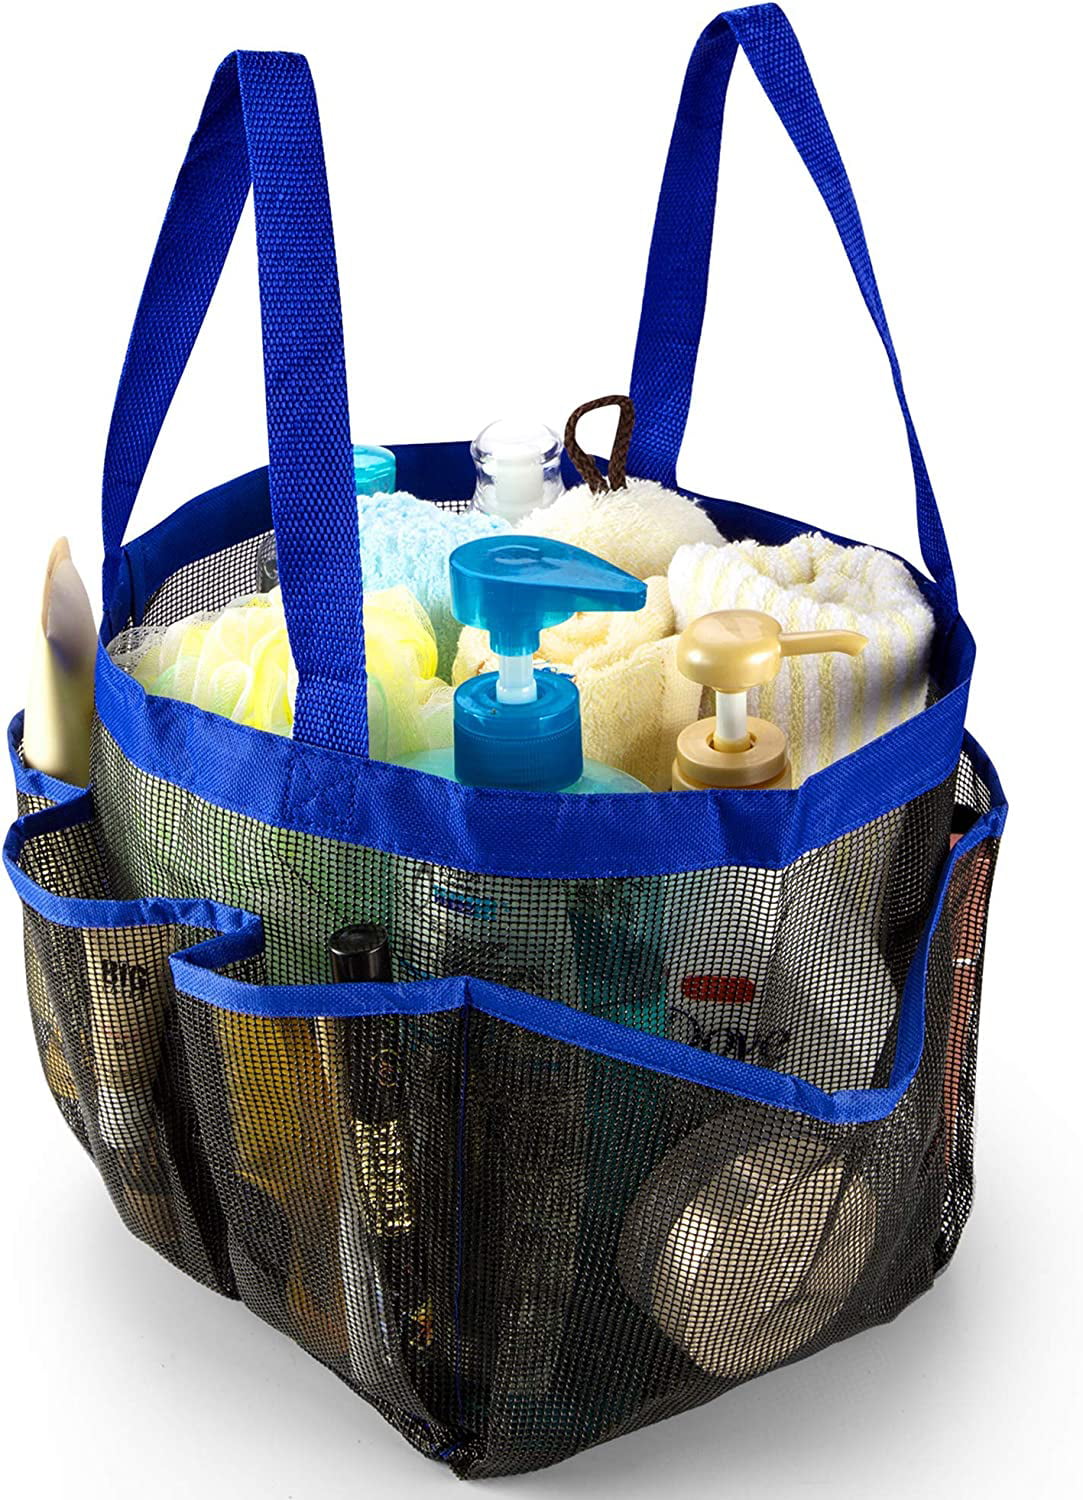 Shower Caddy Mesh 8 Pocket Portable Quick Dry Travel Tote Carry Handle Gym Dorm 